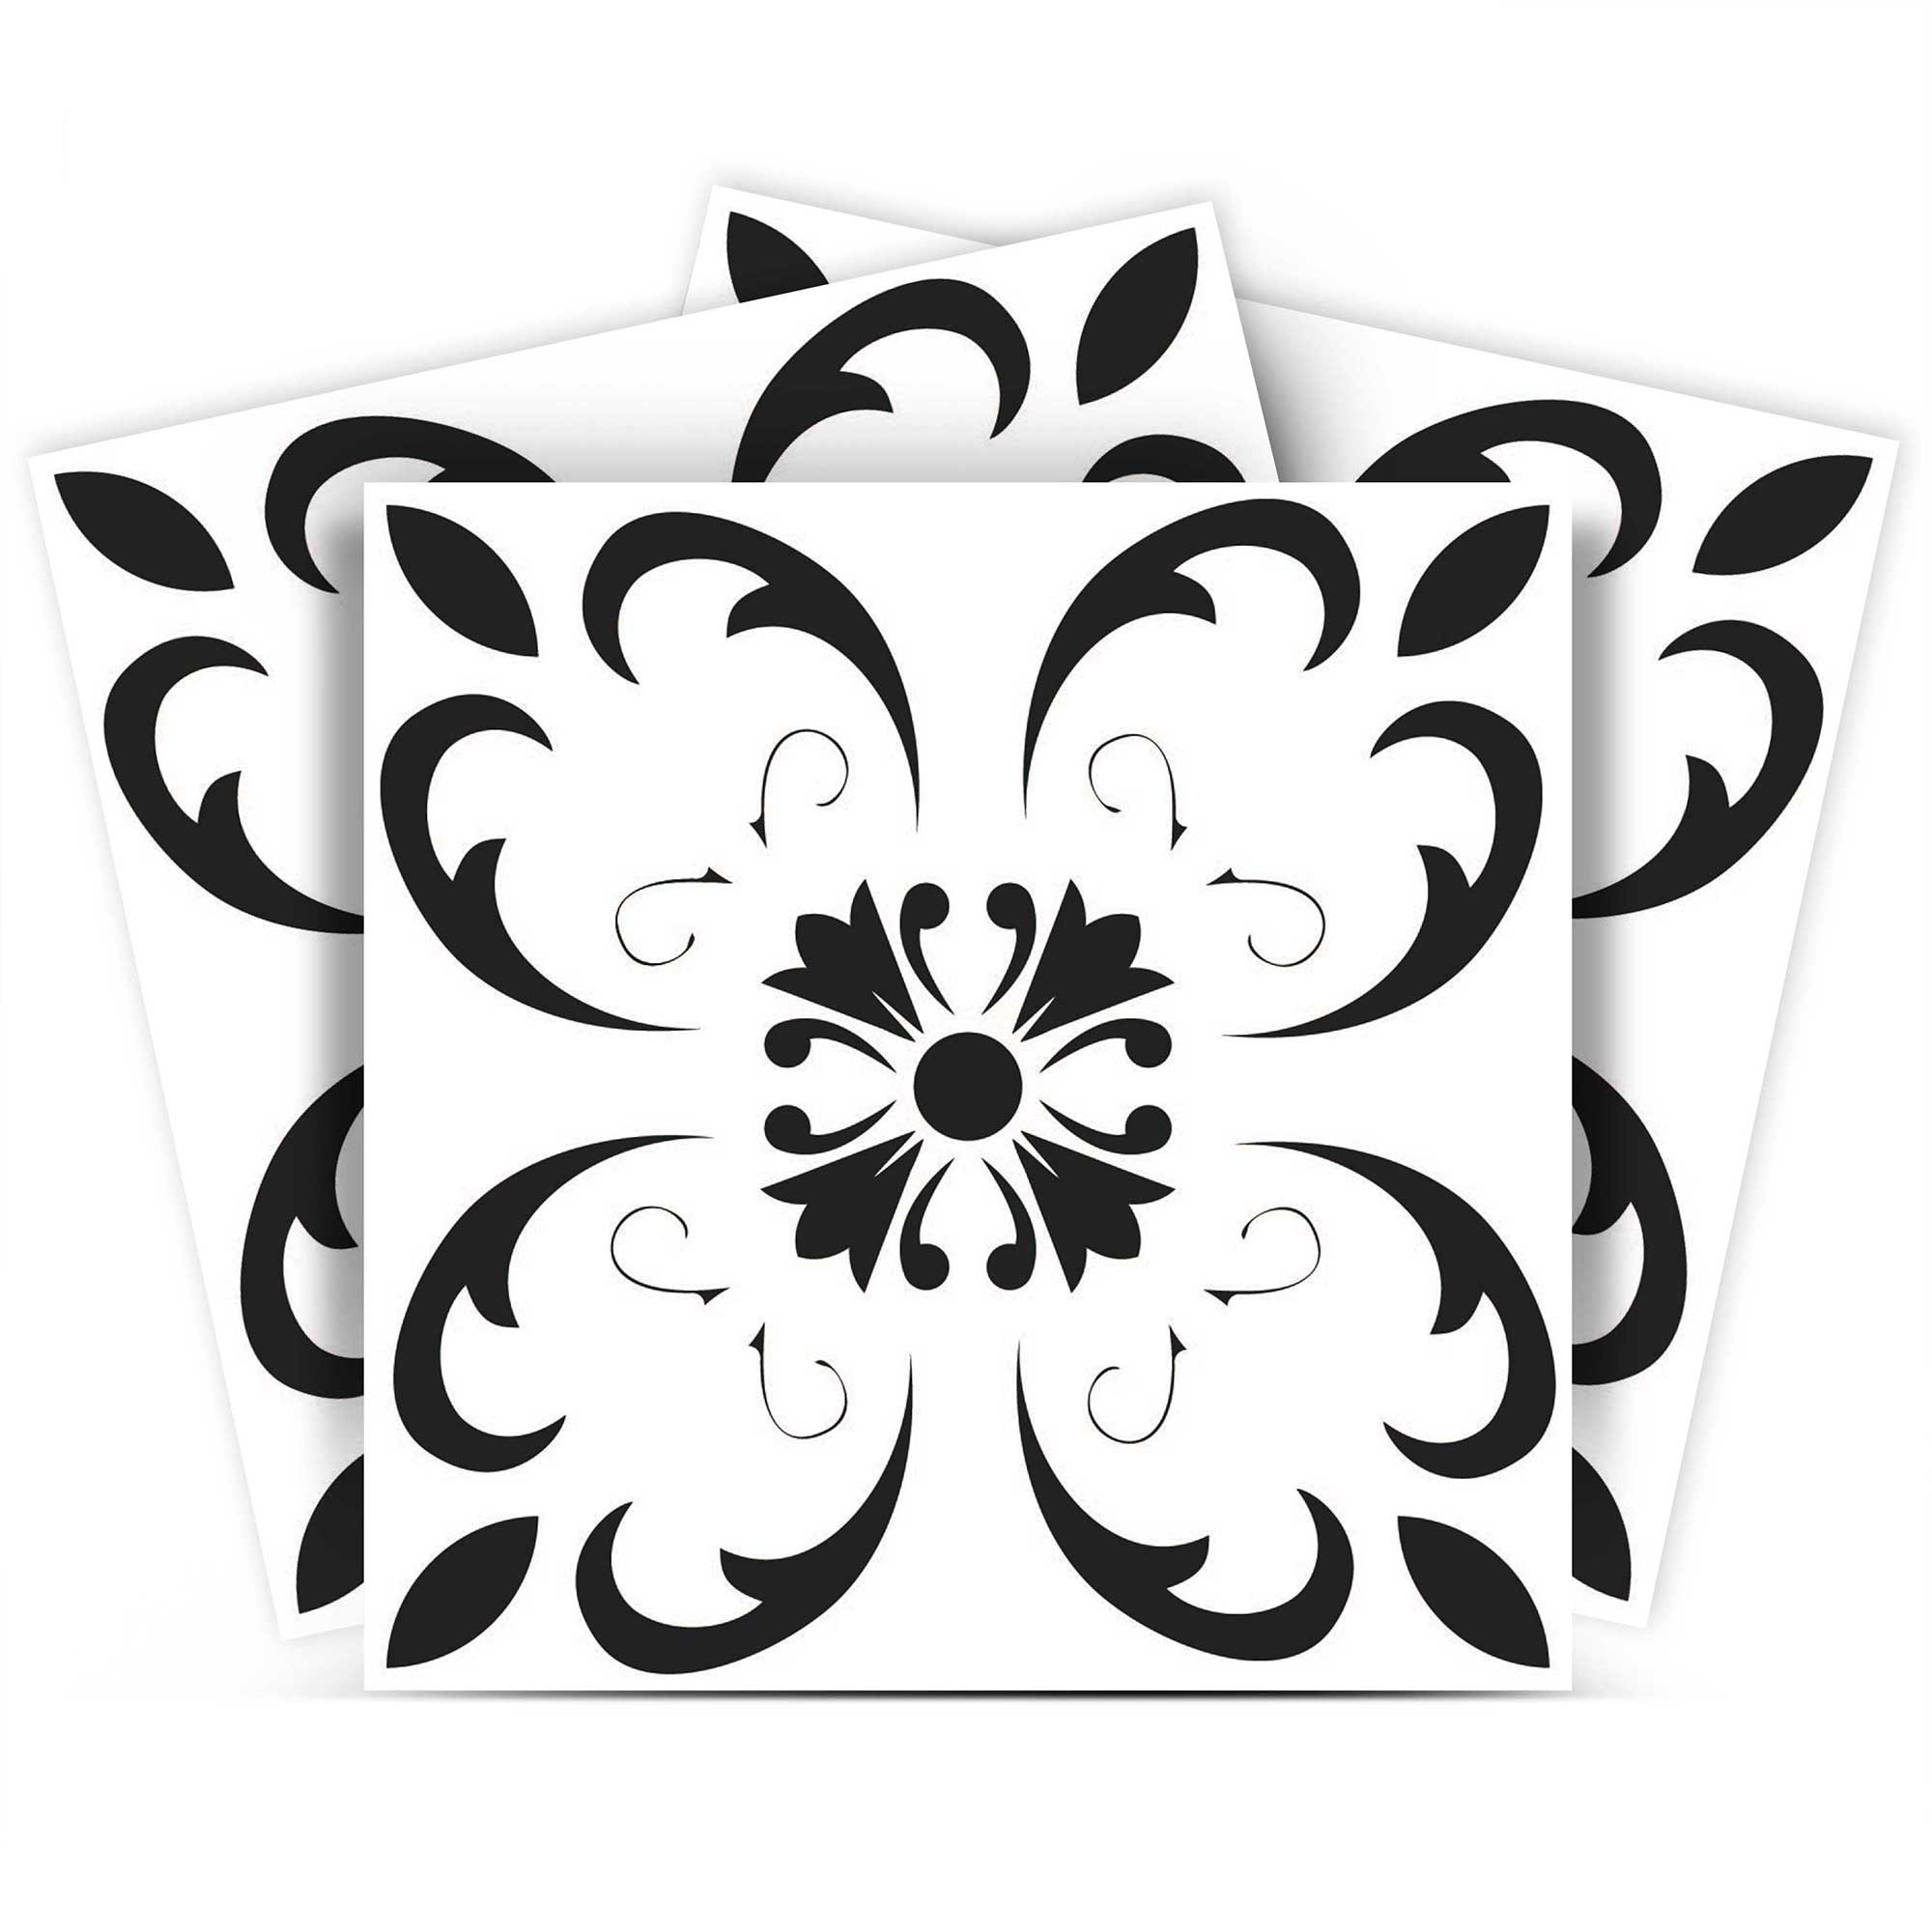 4" X 4" Black and White Delia Peel and Stick Removable Tiles-399890-1